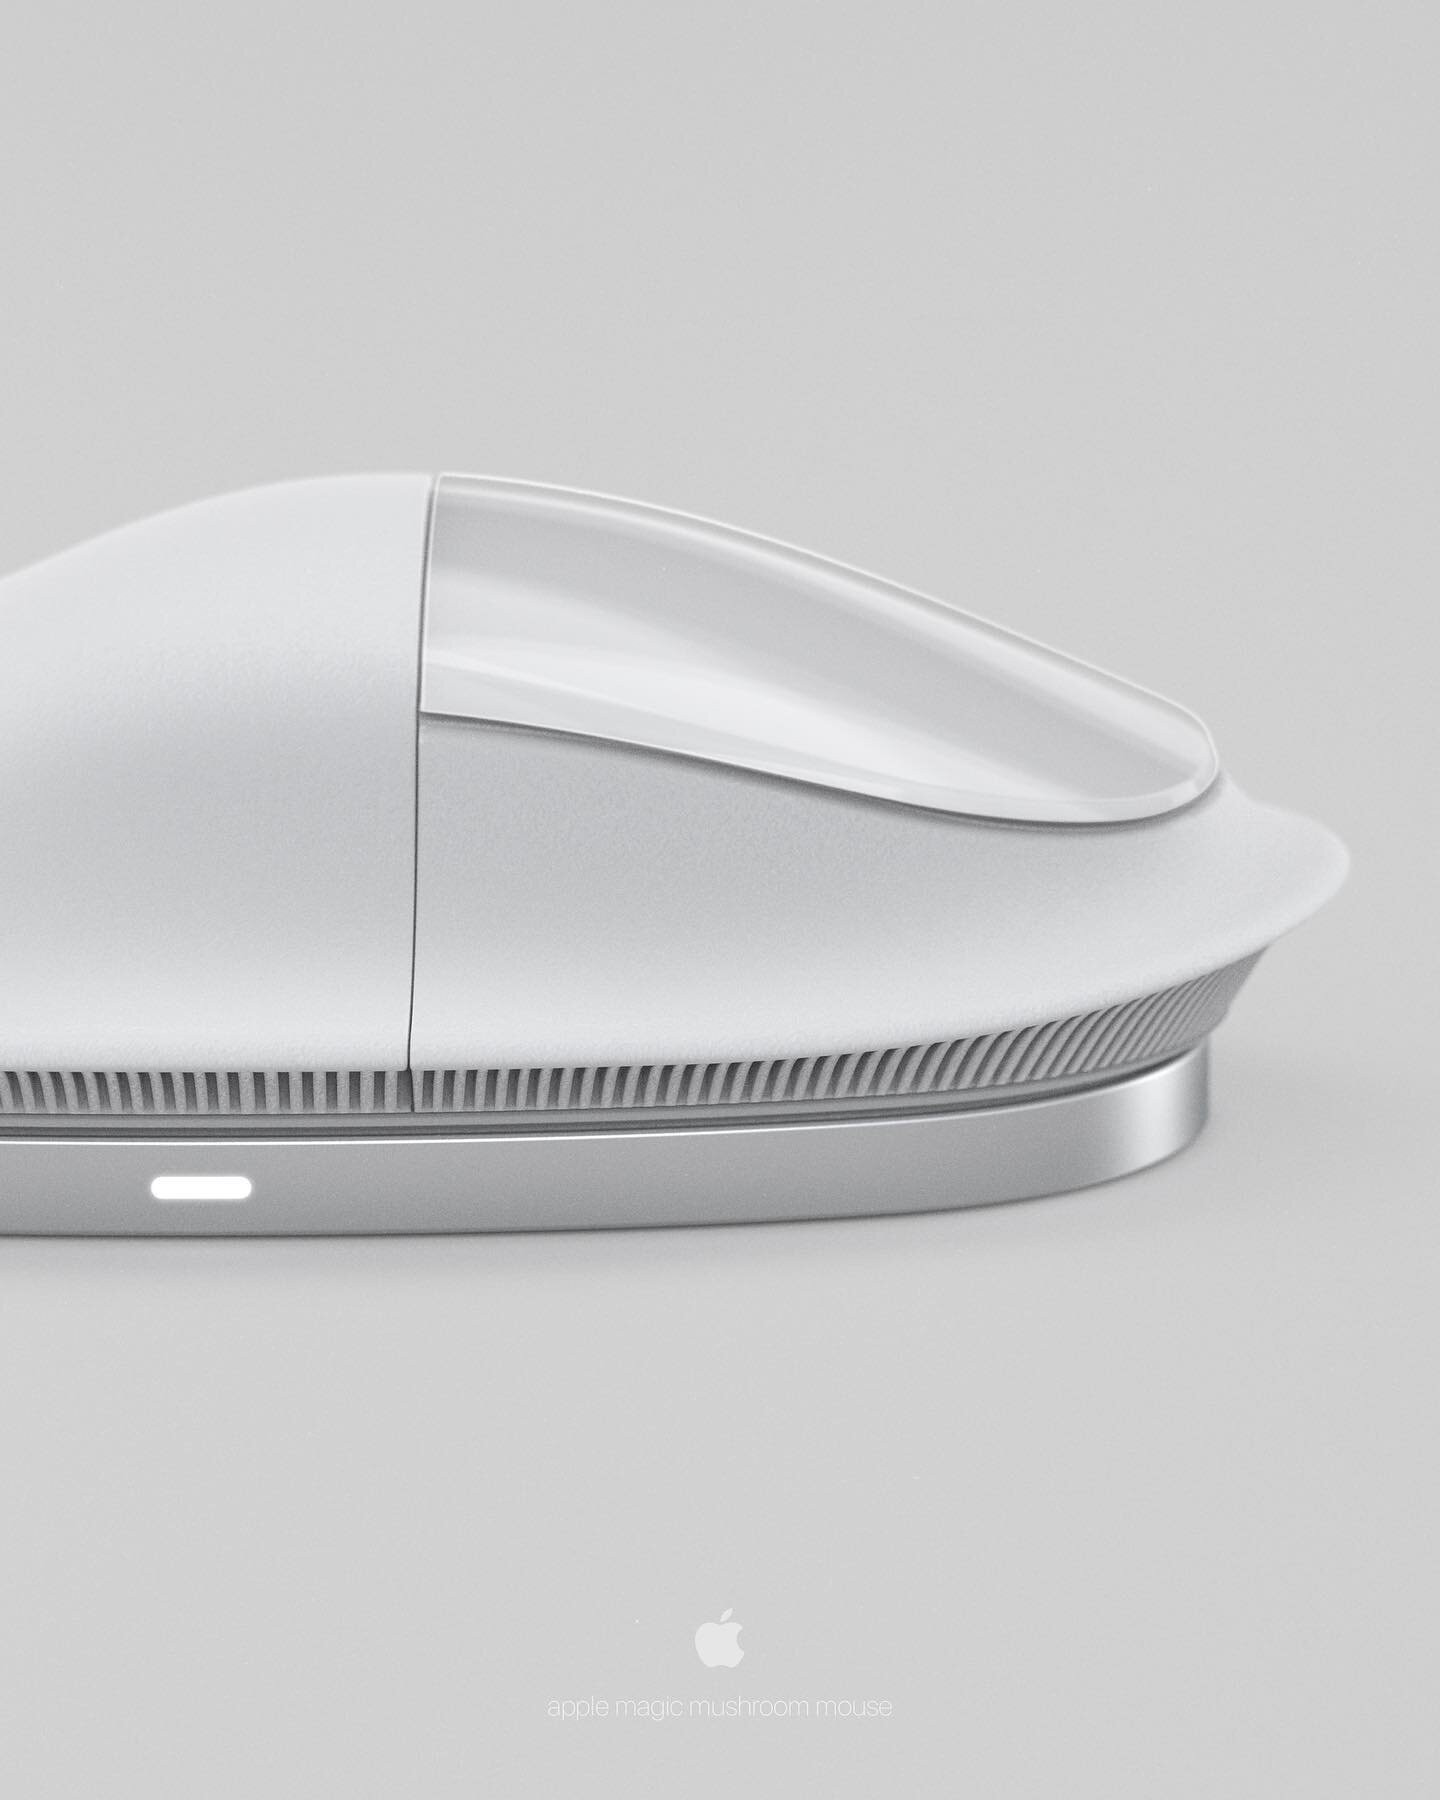 Here is what I&rsquo;m calling the Apple Magic Mushroom Mouse, the successor to the Apple Magic Mouse! 
&mdash;
The original Magic Mouse released in 2009, and I think it&rsquo;s about time apple released a premium mouse that fits the high-end ecosyst